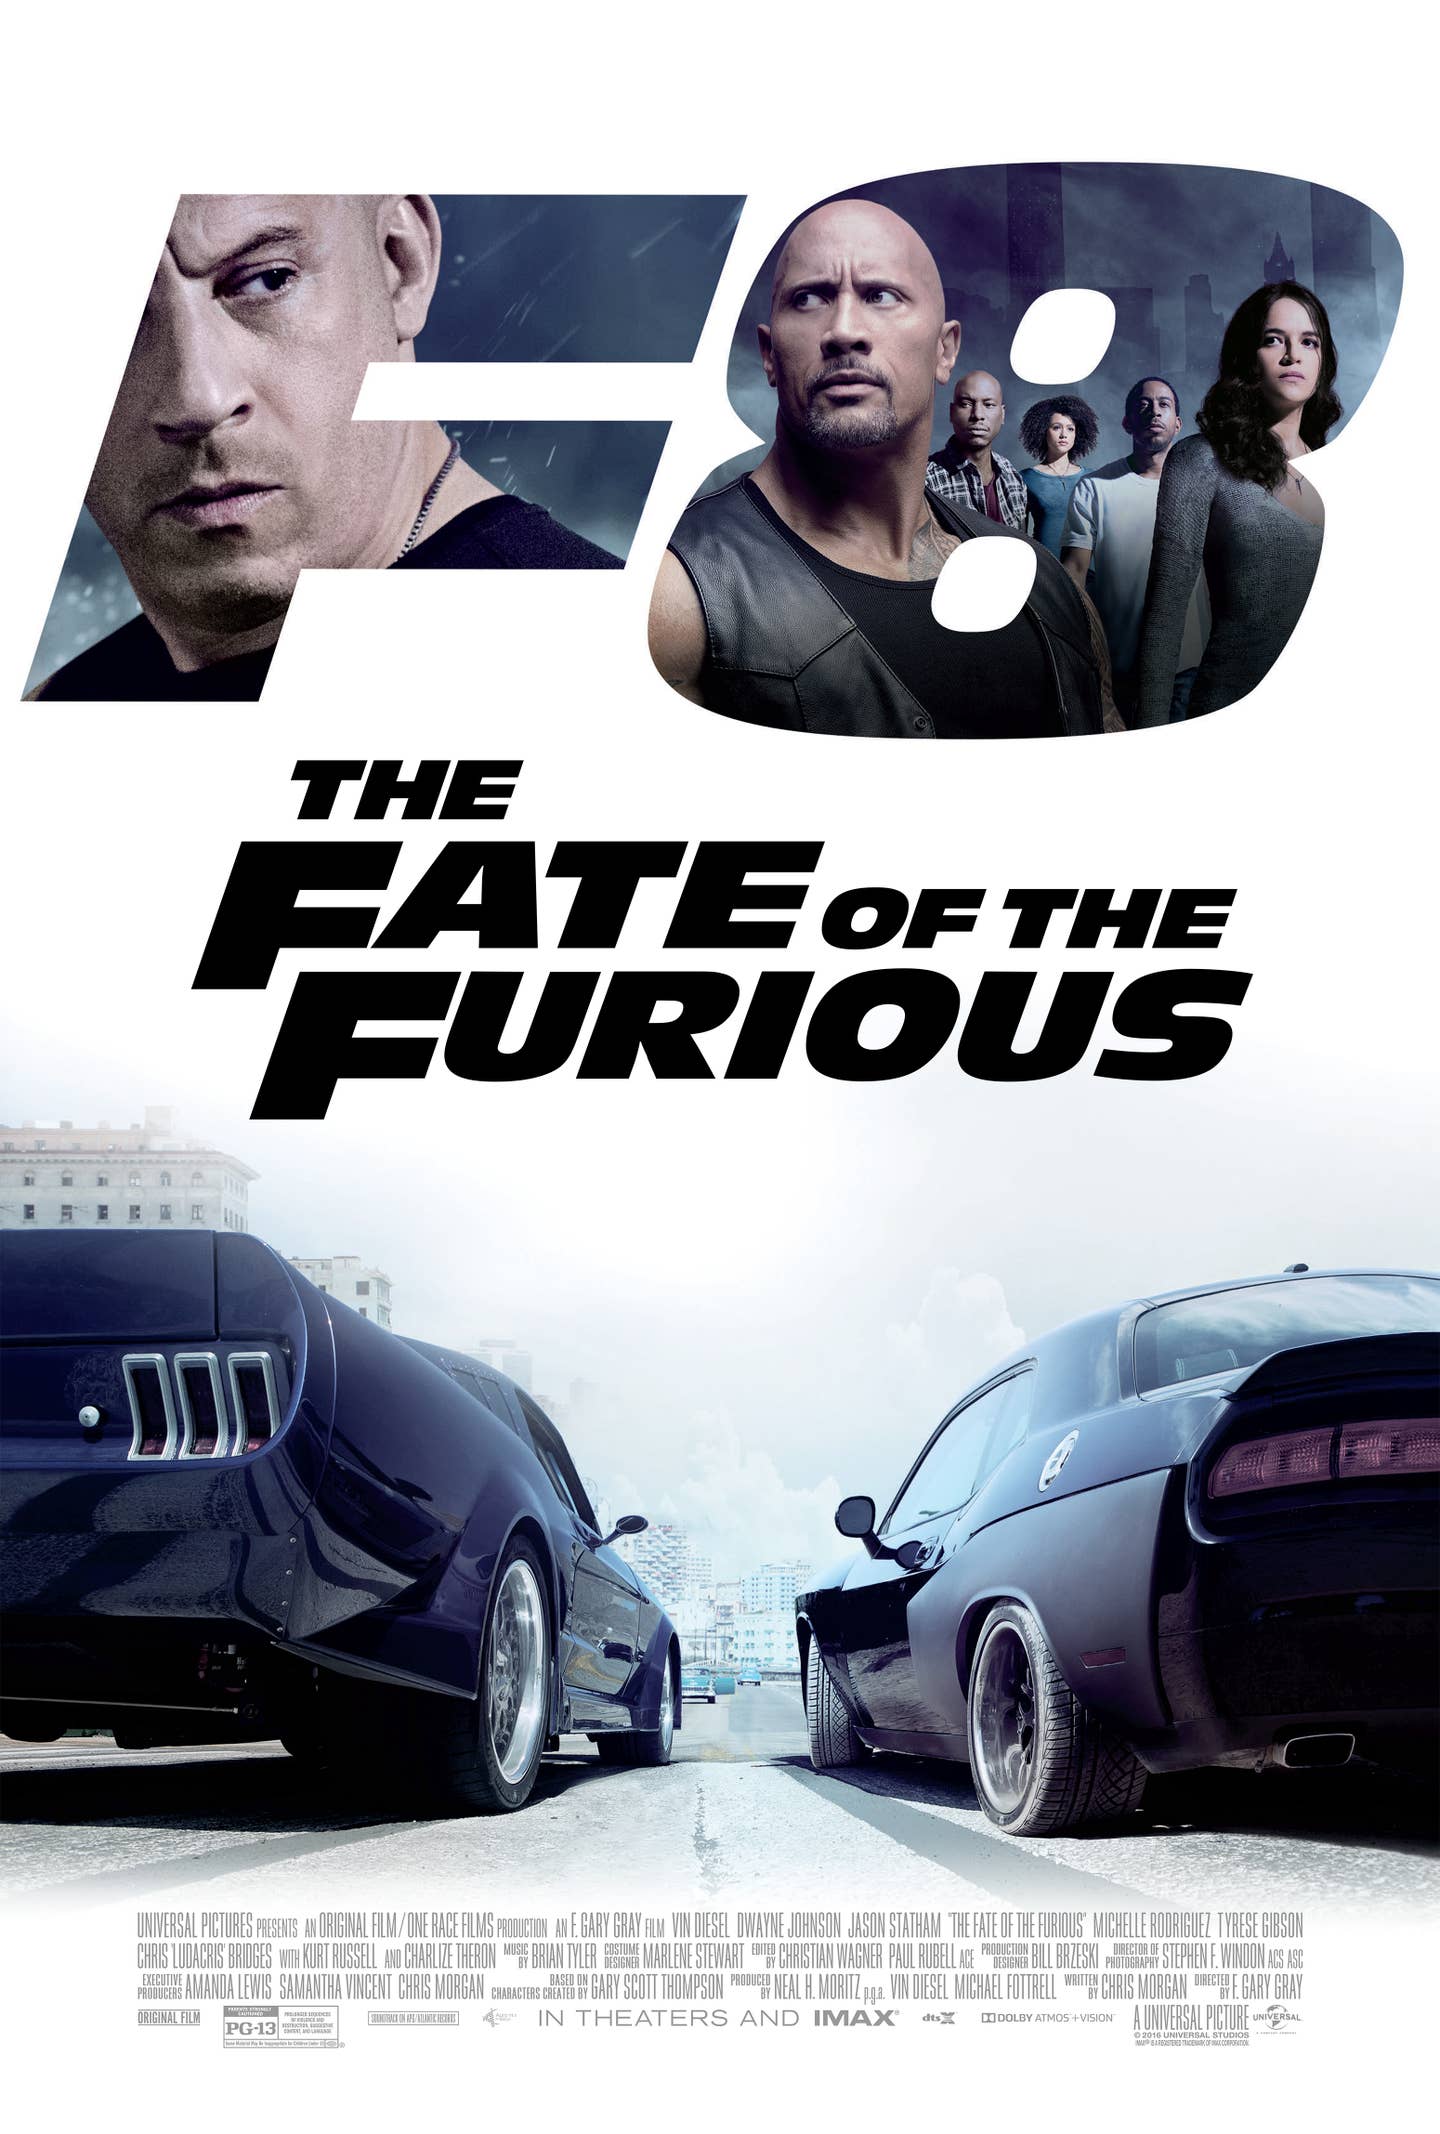 The poster for The Fate of the Furious.